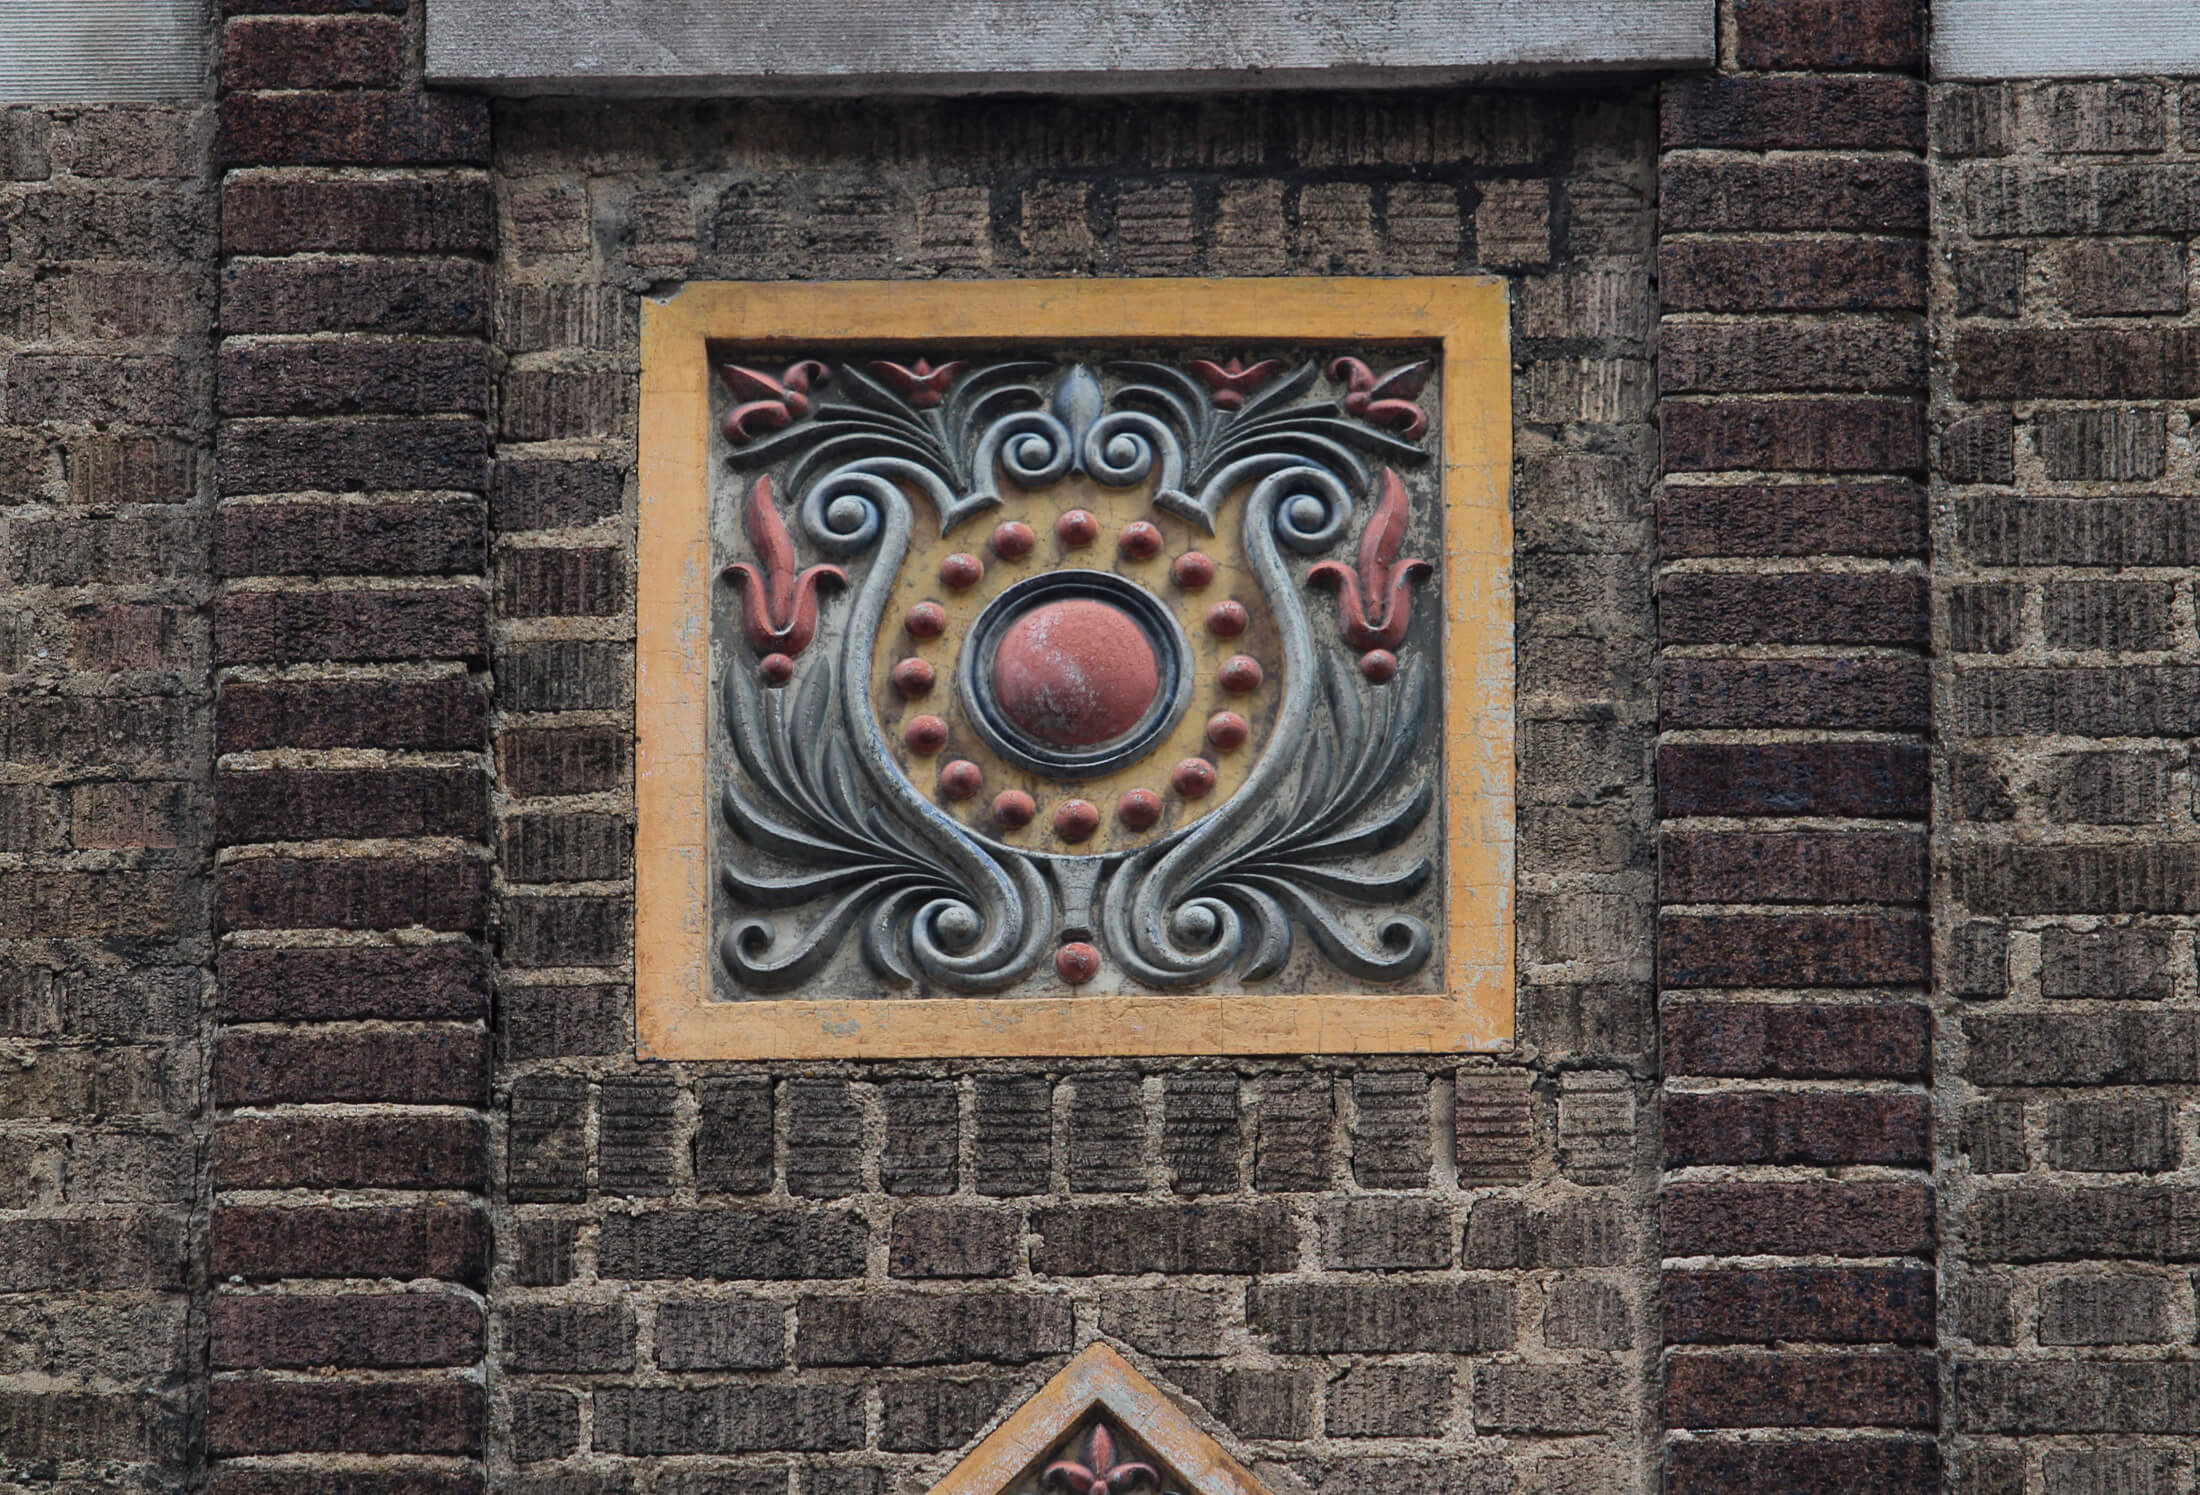 decorative detail in downtown brooklyn